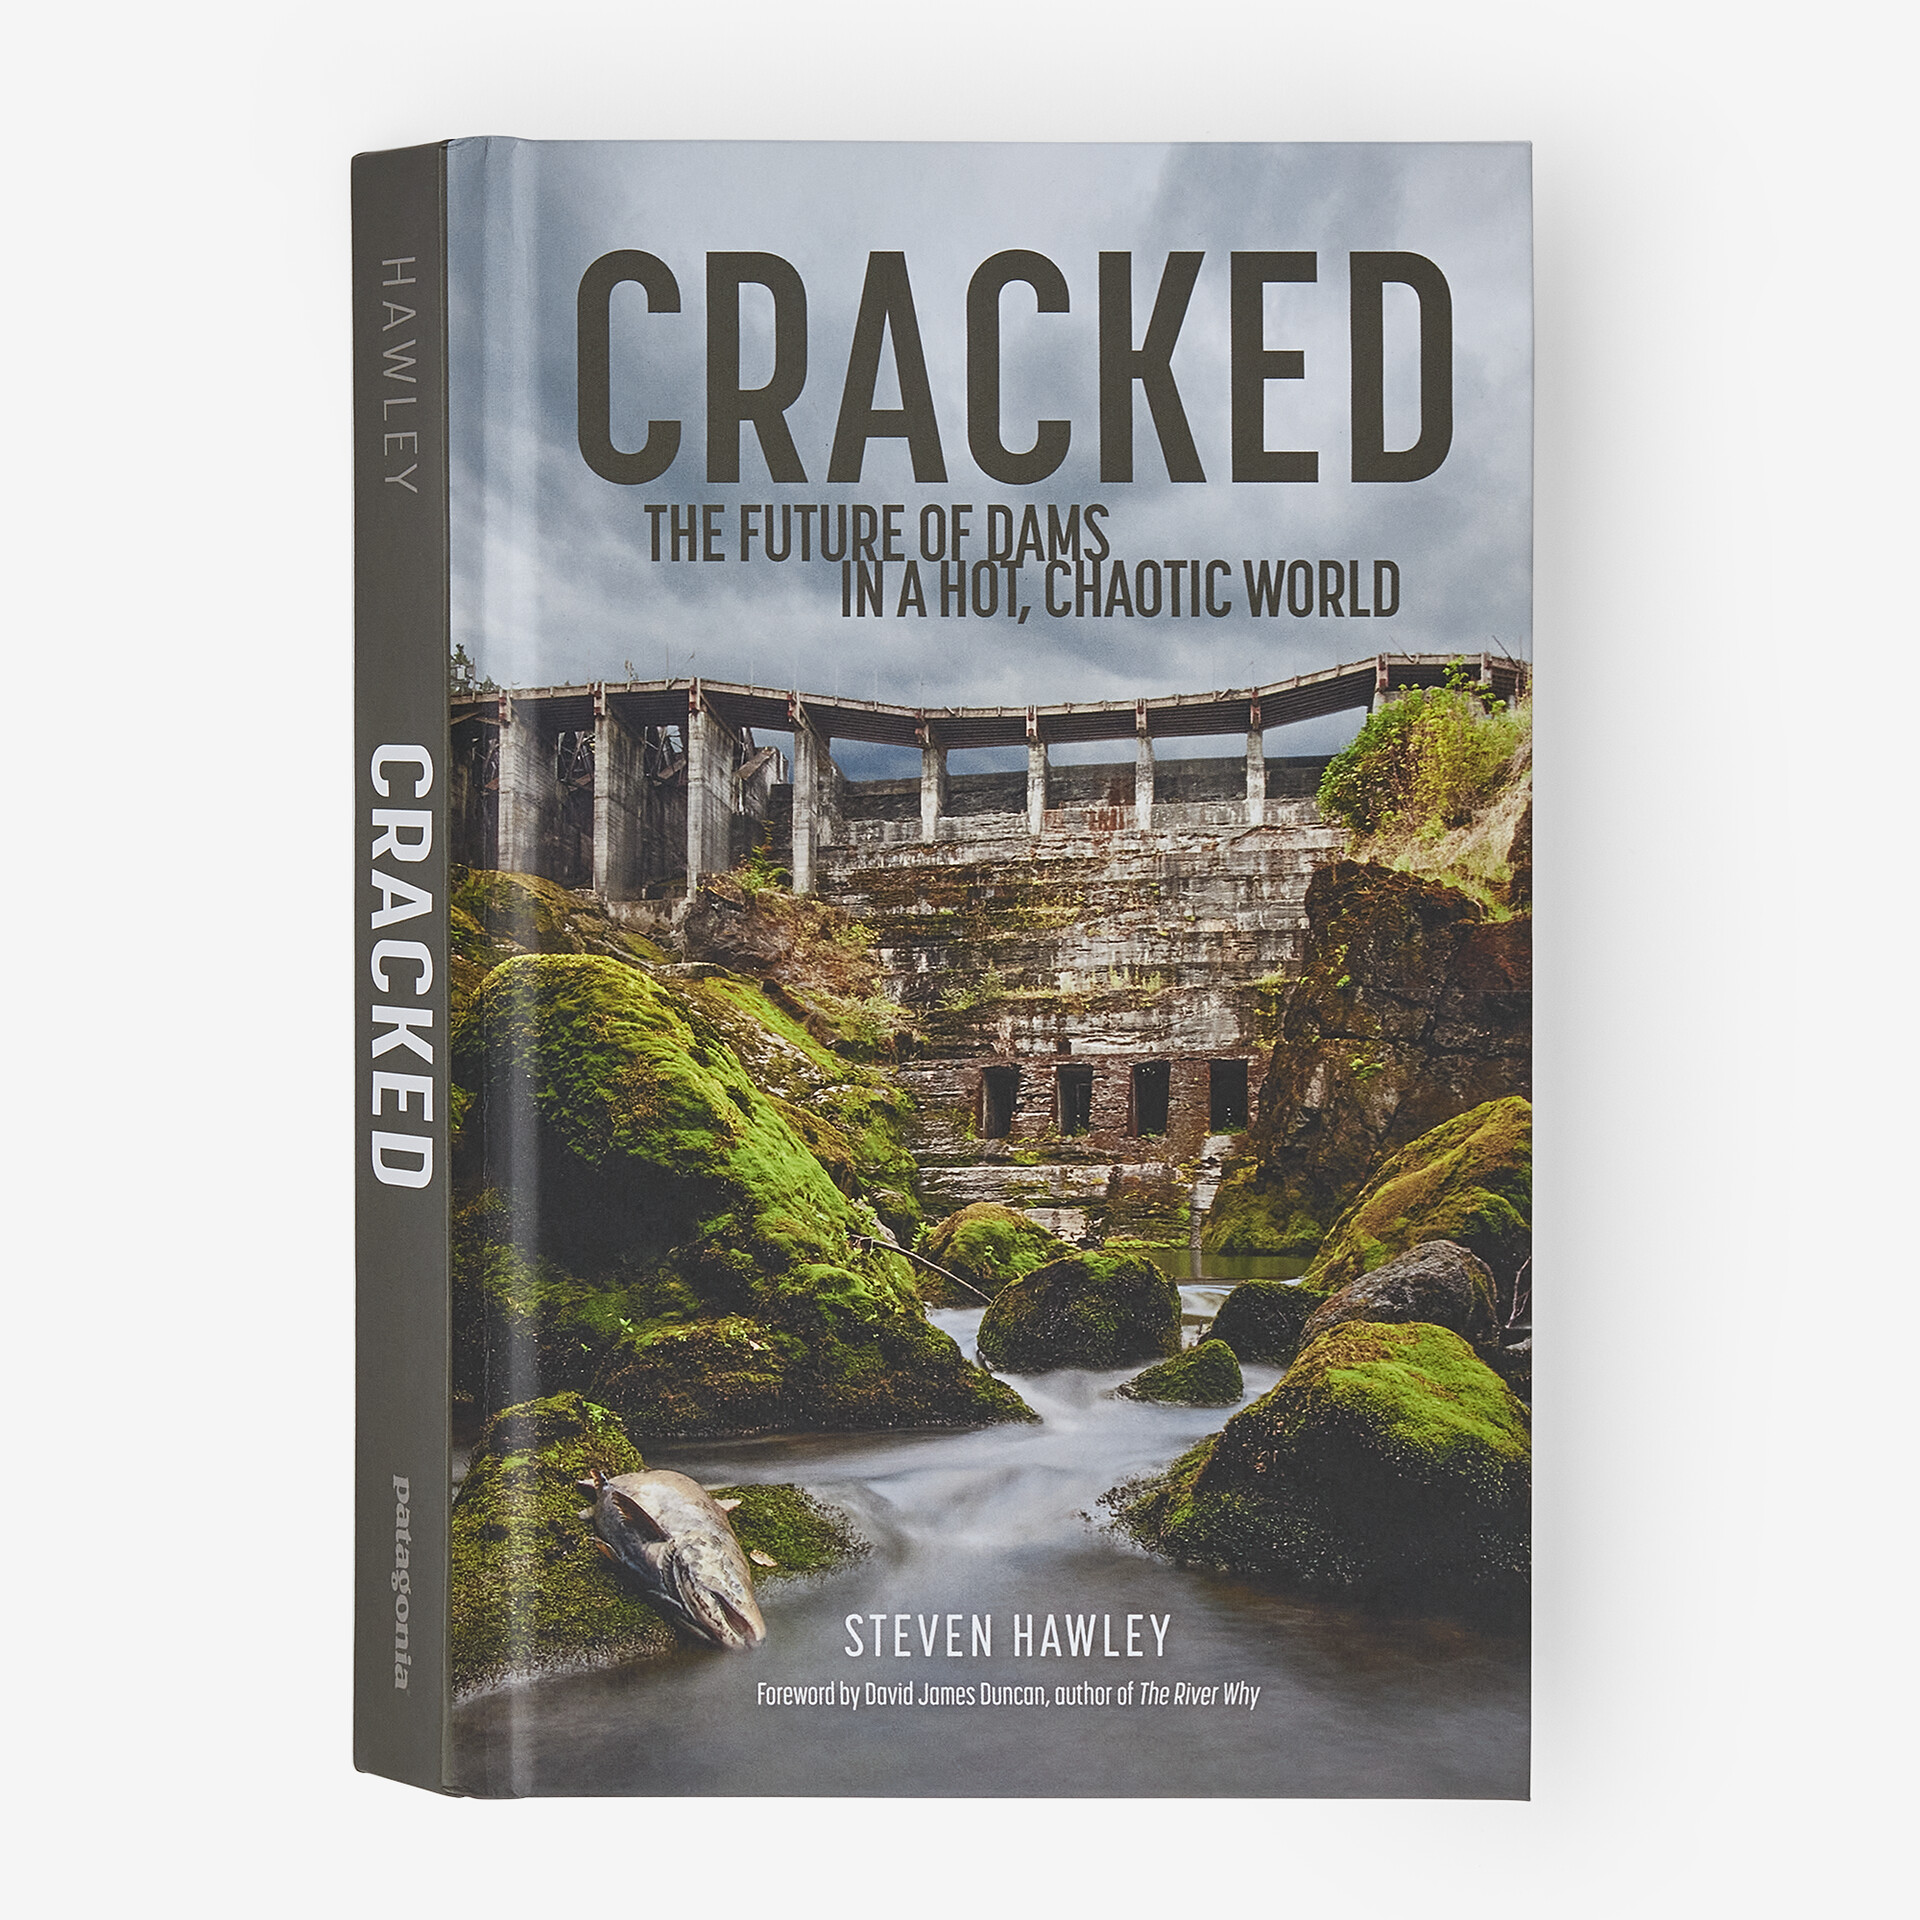 Steven Hawley, Cracked: The Future of Dams in a Hot, Chaotic World. Ventura, CA: Patagonia Books, 2023.